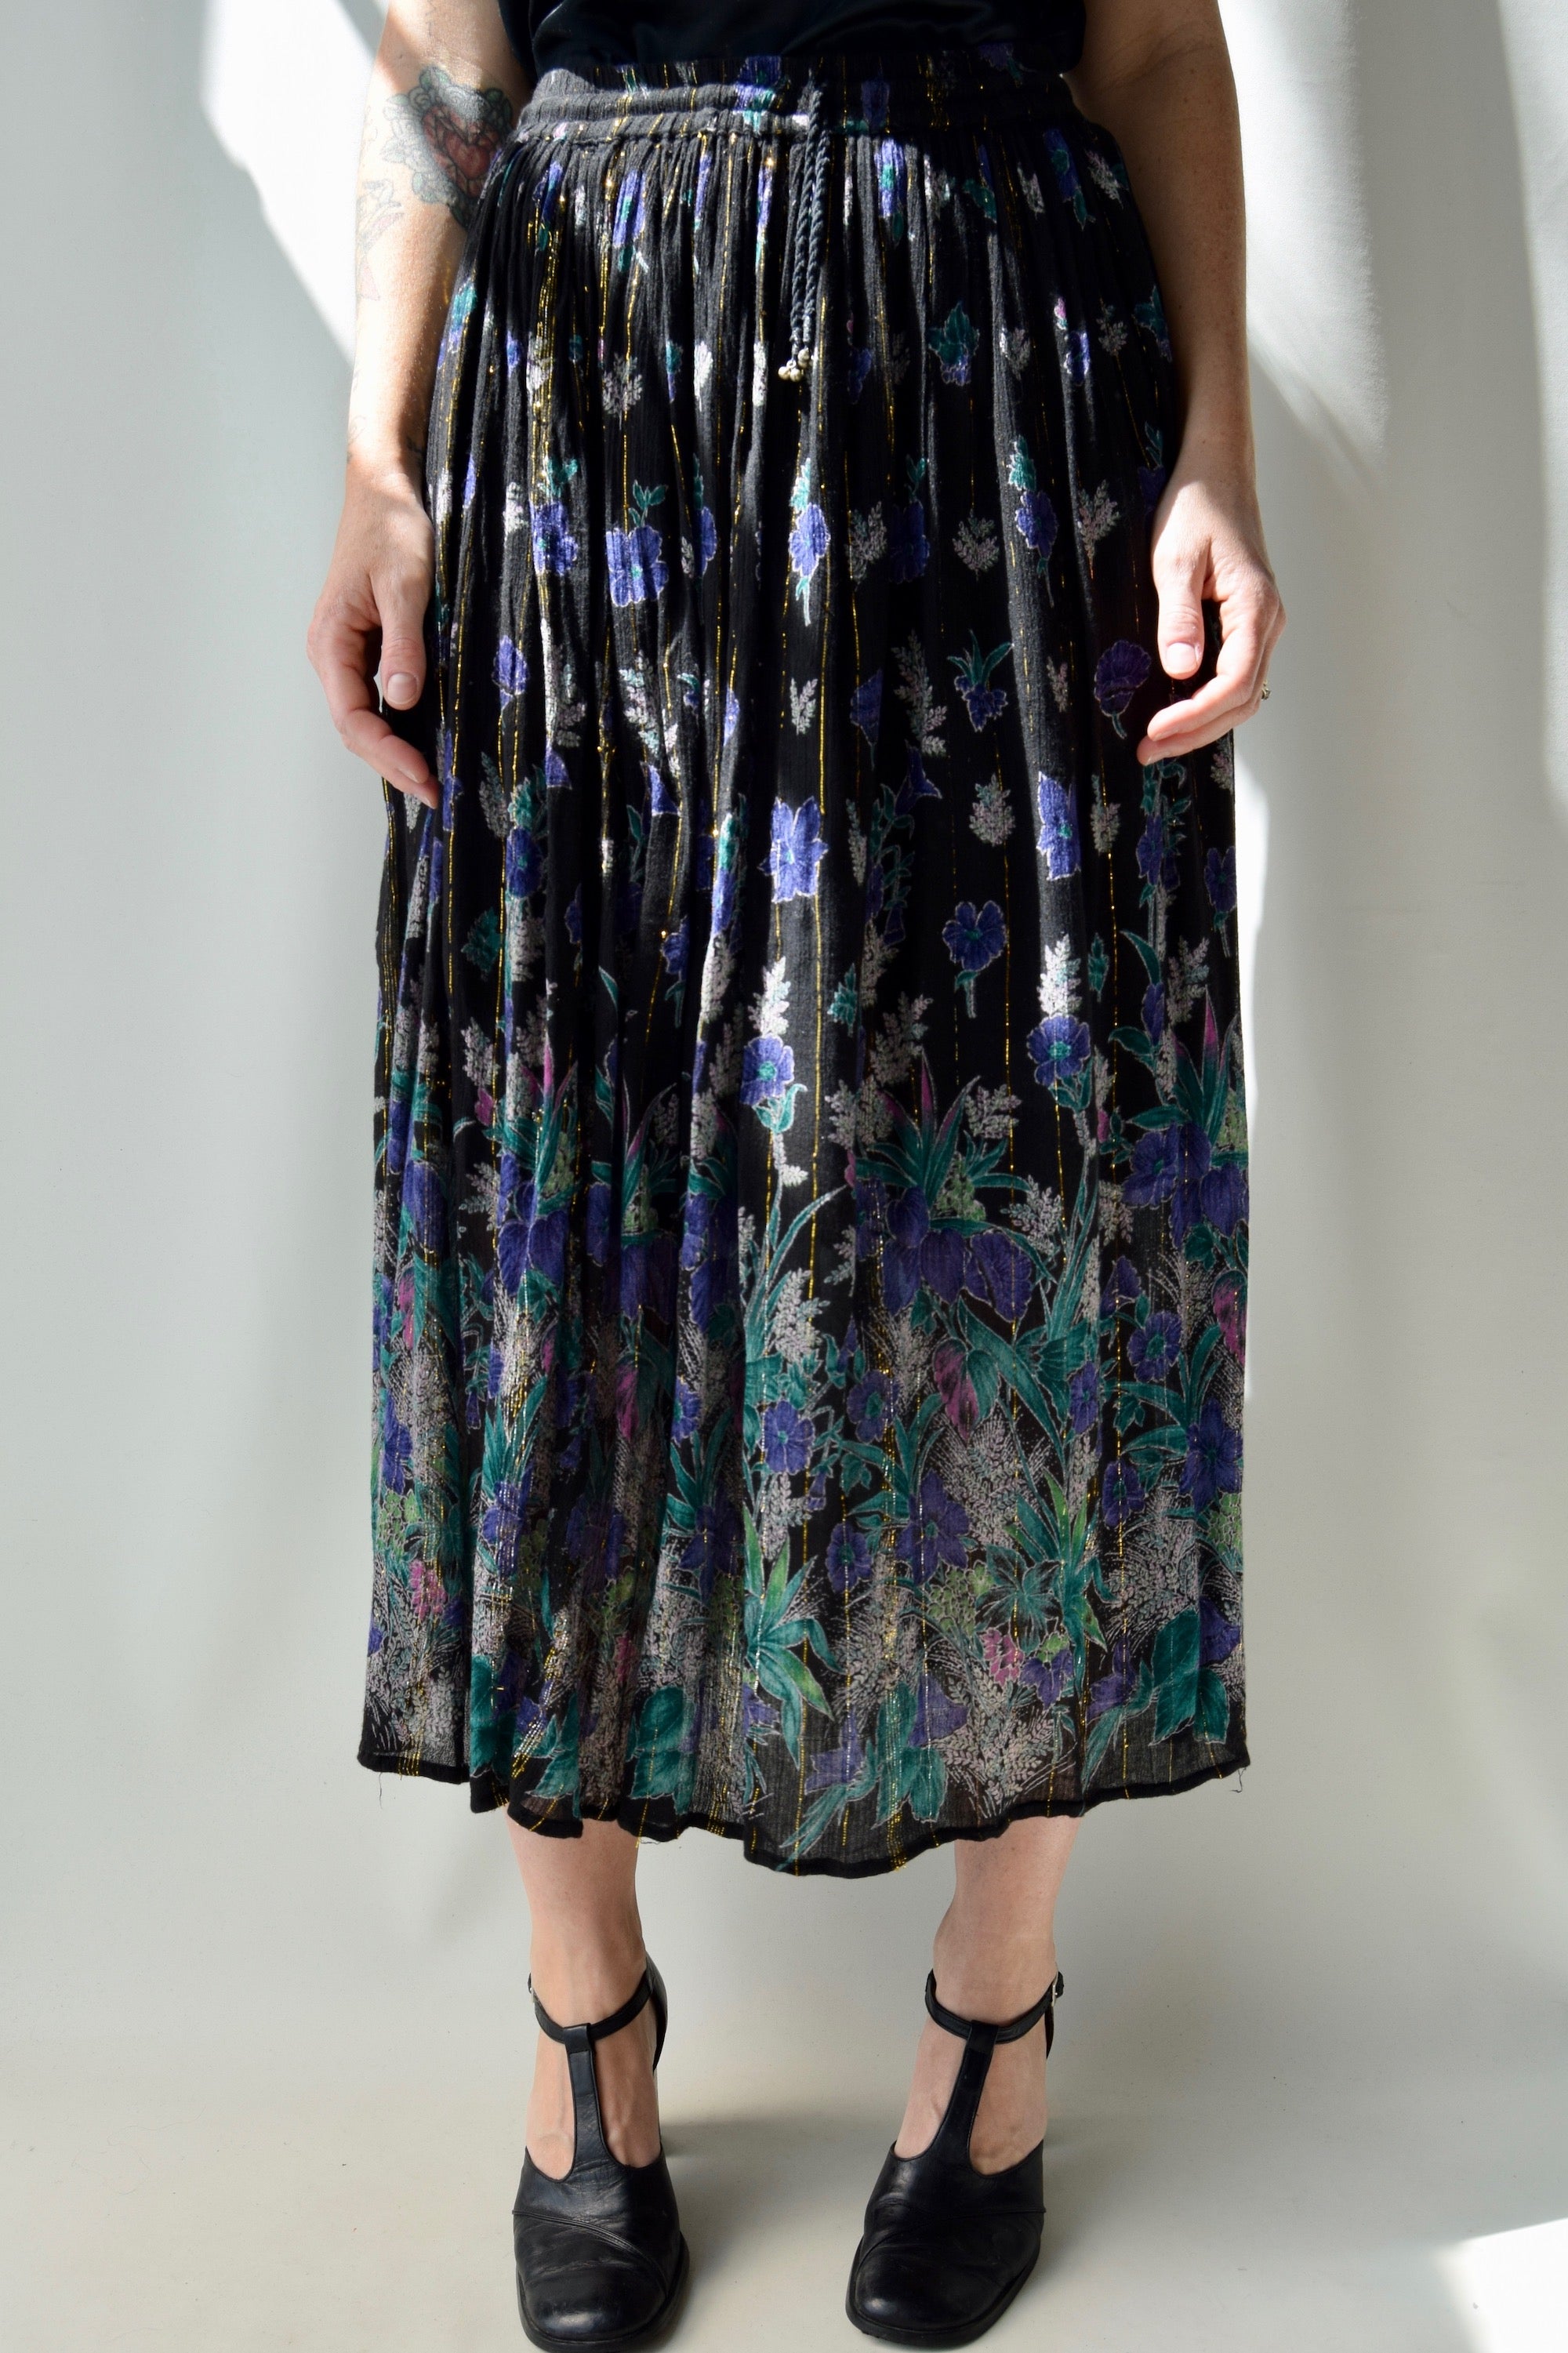 Floral Skirt With Metallic Thread